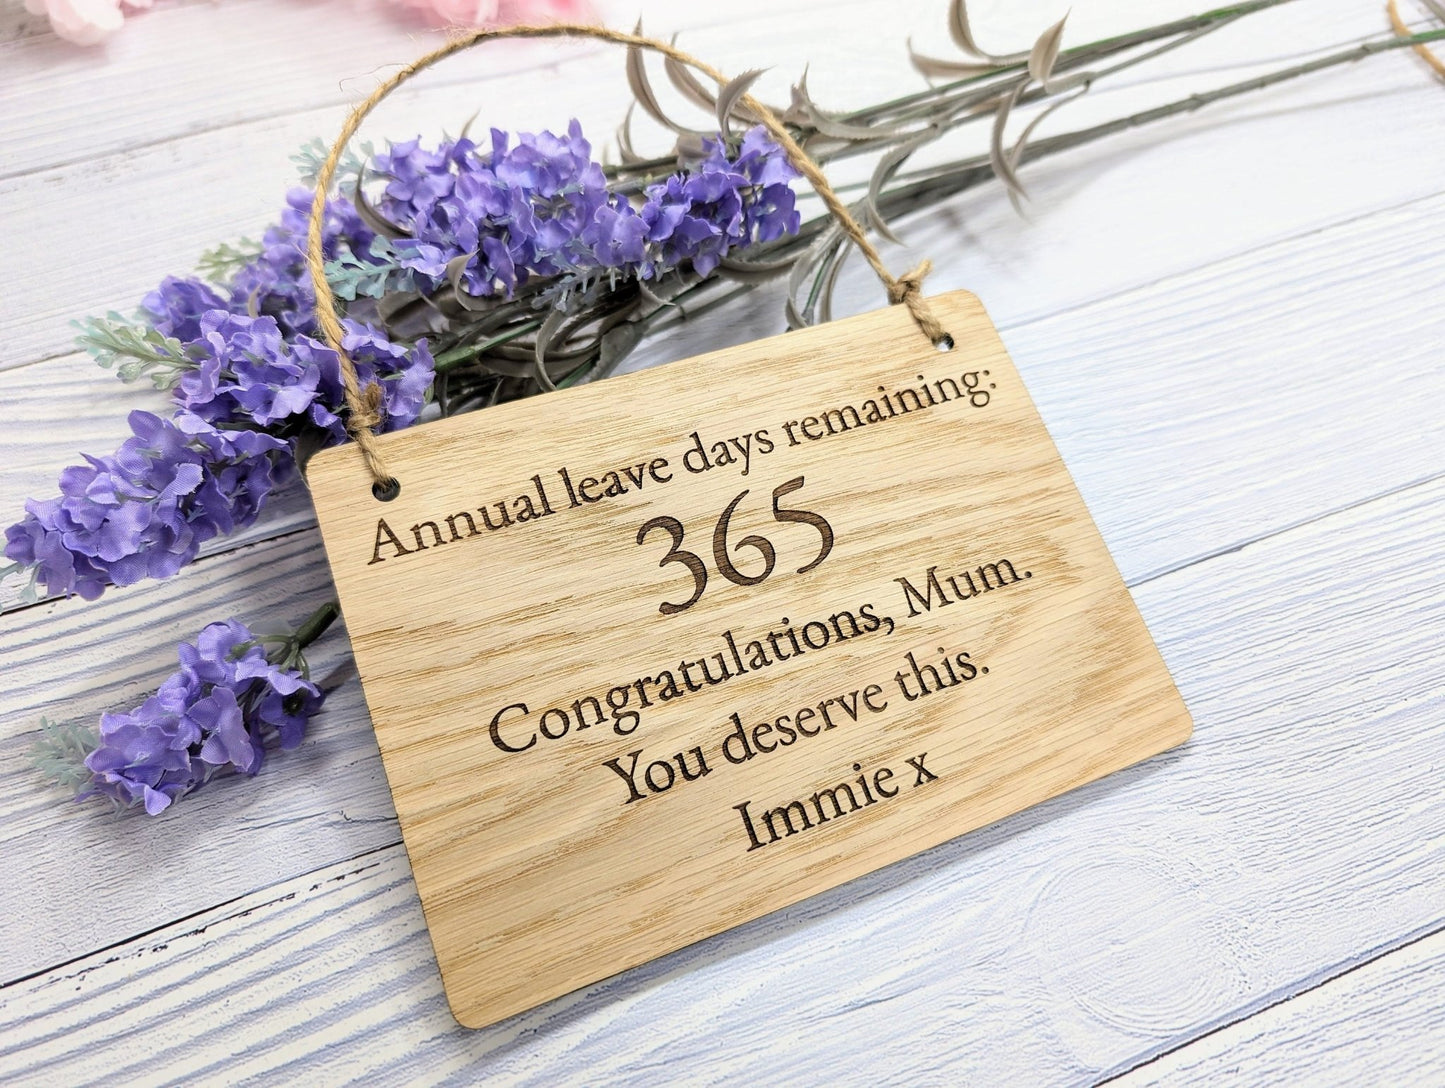 Personalised Retirement Sign in Oak Veneer - '365 Days Remaining' Keepsake - Custom Farewell Message Plaque | Perfect for Any Retiree - CherryGroveCraft